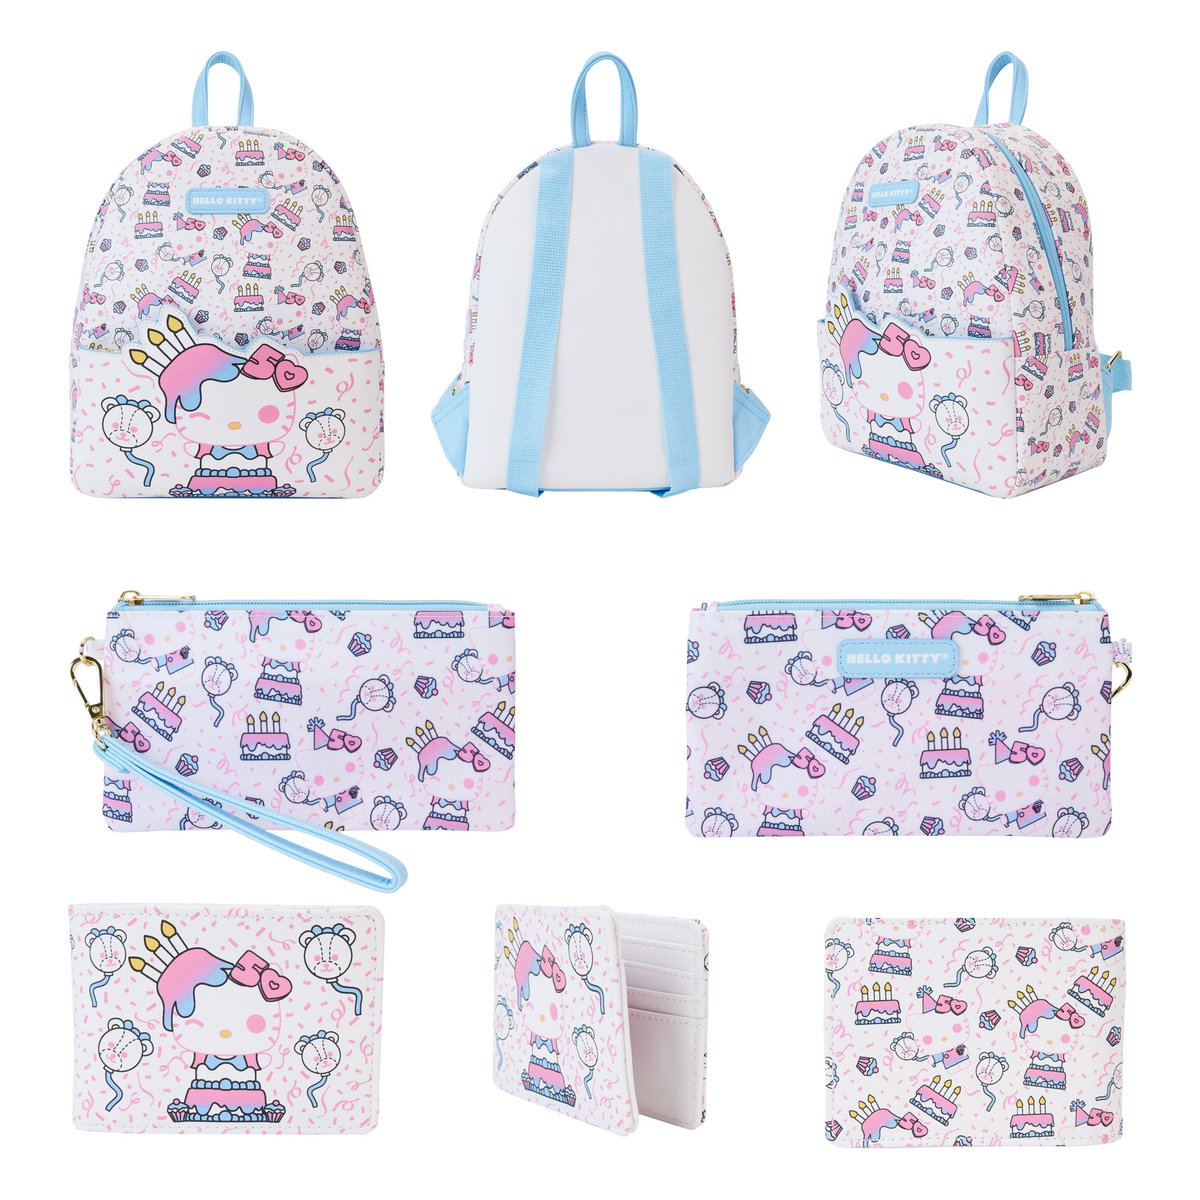 Available Now: Hello Kitty in Cake (50th Anniversary) Mini Backpack, Wallet, and Wristlet on Funko Shop

Link: finderz.info/3Uw3HP9

#Ad #HelloKitty #HelloKitty50th #Funko #FunkoPop #FunkoPops #FunkoPopVinyl #Pop #PopVinyl #FunkoCollector #Collectible #Collectibles #Toy #Toys…